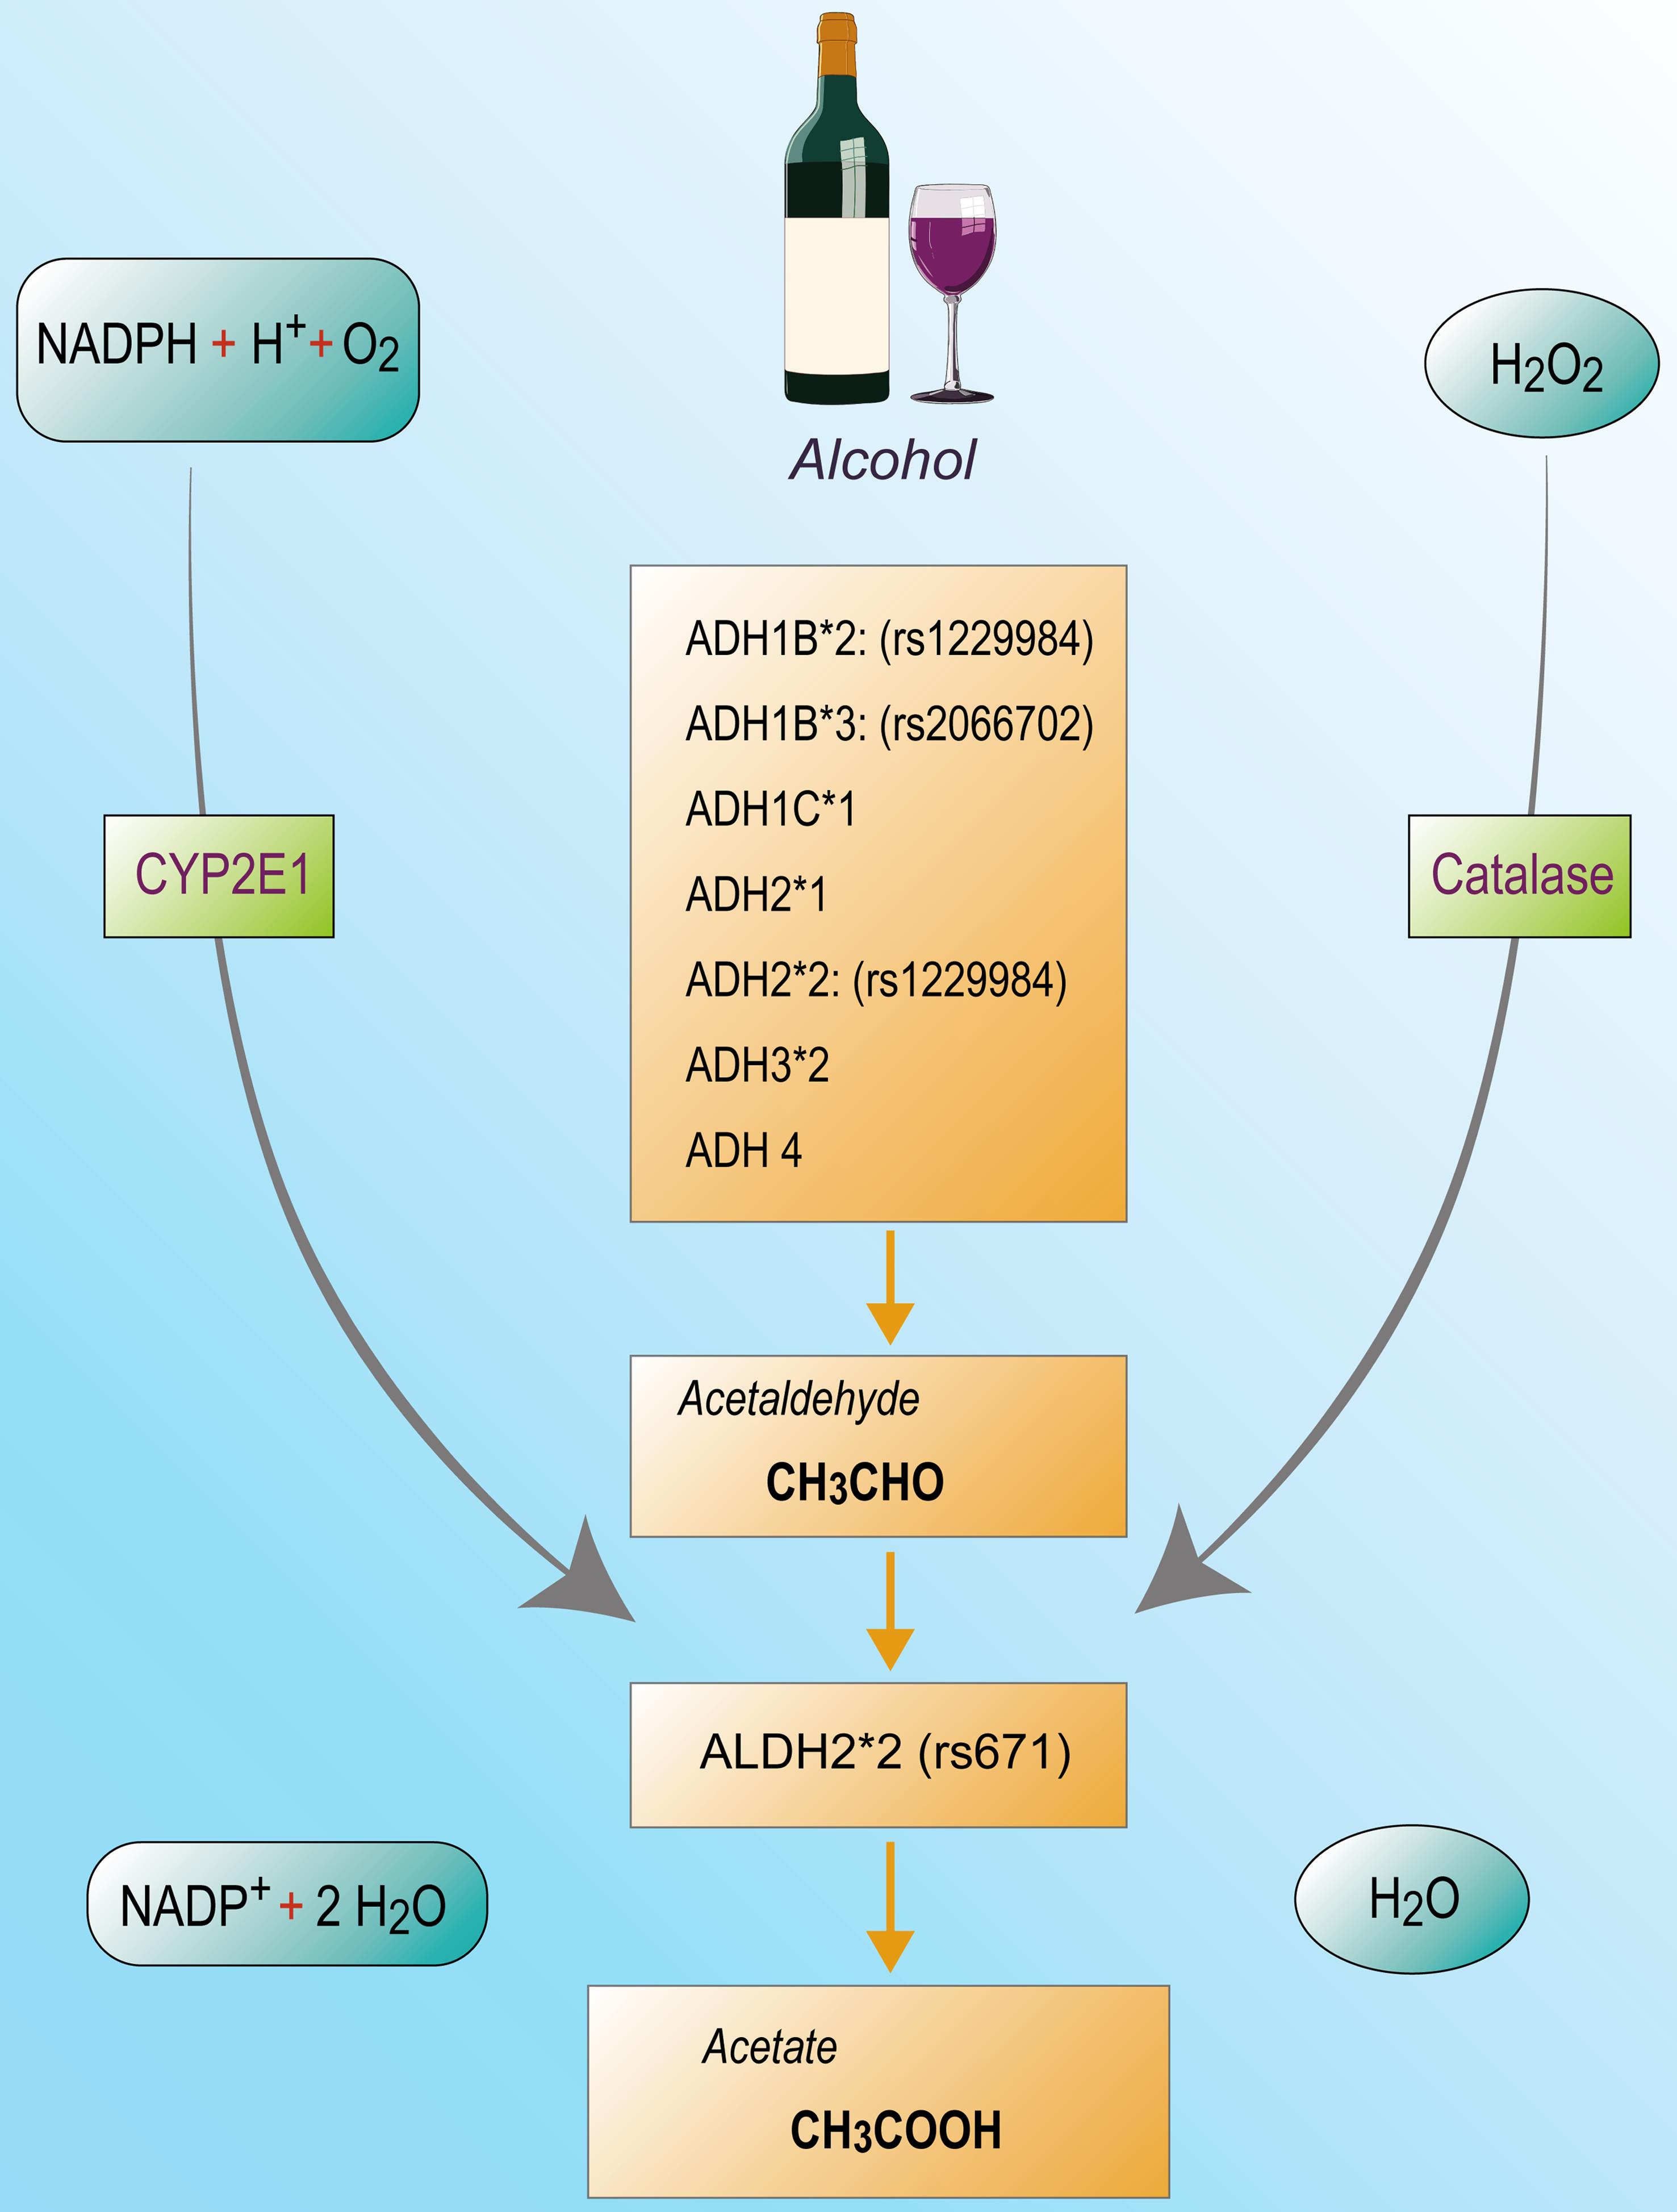 Genes involved in the hepatic metabolism of alcohol.